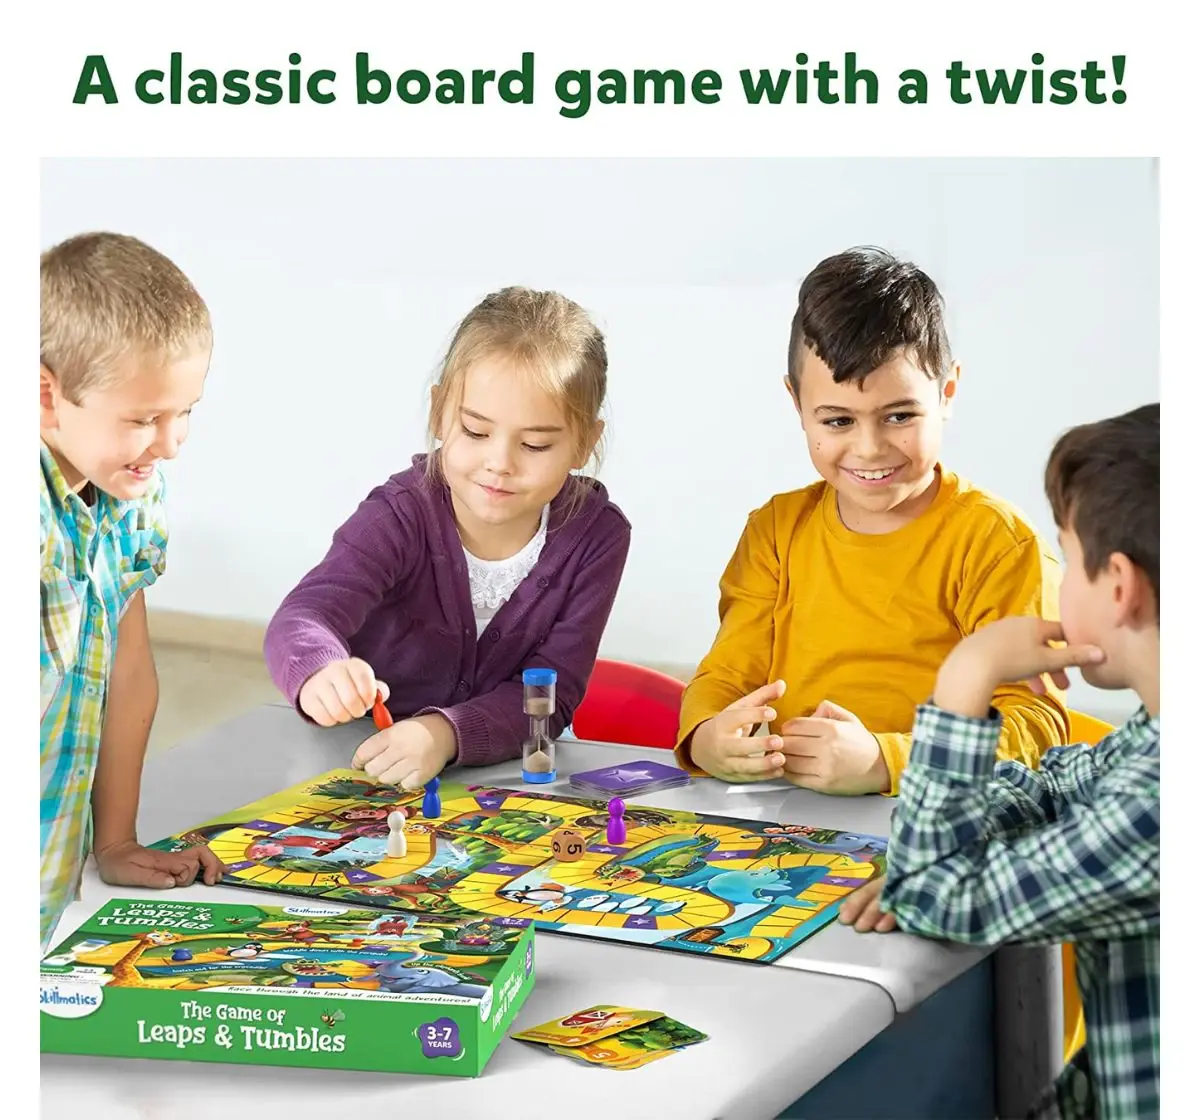 Skillmatics Board Game - Leaps & Tumbles, Race Through The Land of Animal Adventures, Classic Game with a Twist for Ages 3 to 7, Multicolour